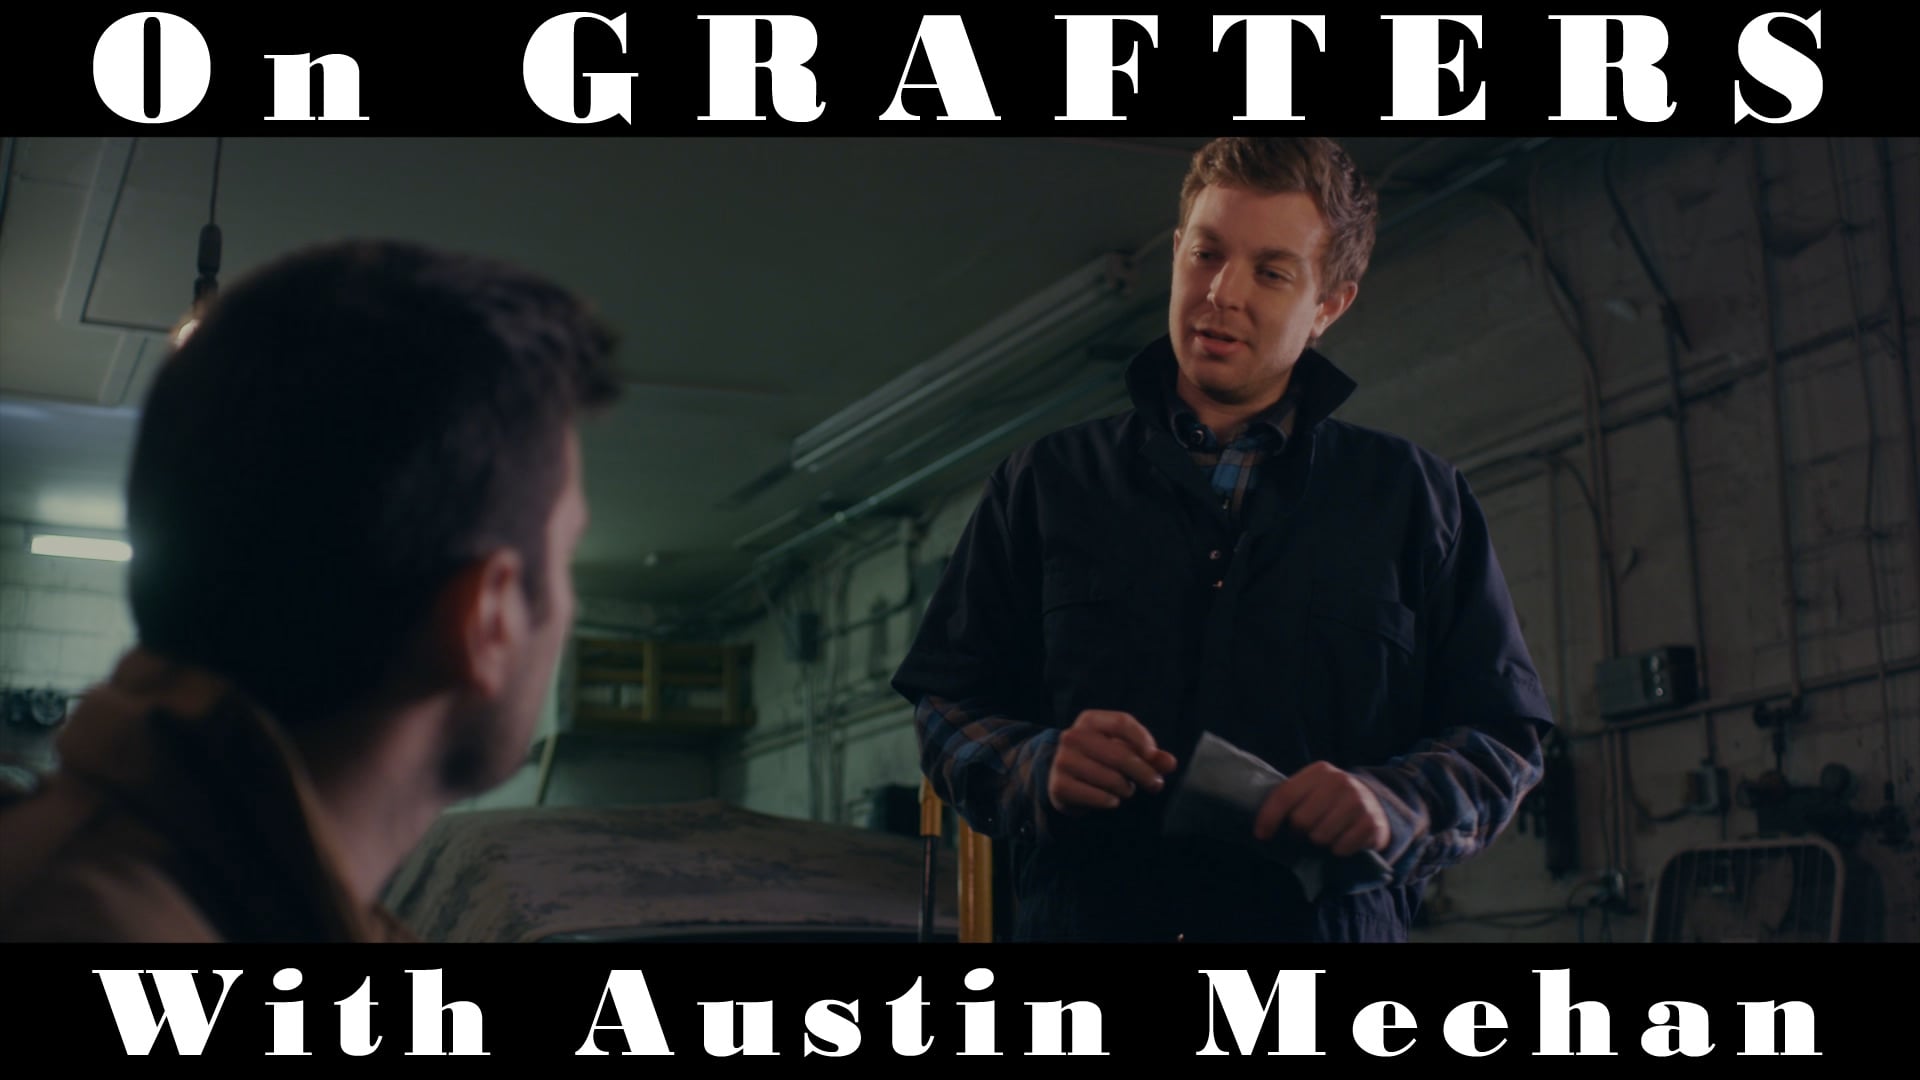 On GRAFTERS, with Austin Meehan